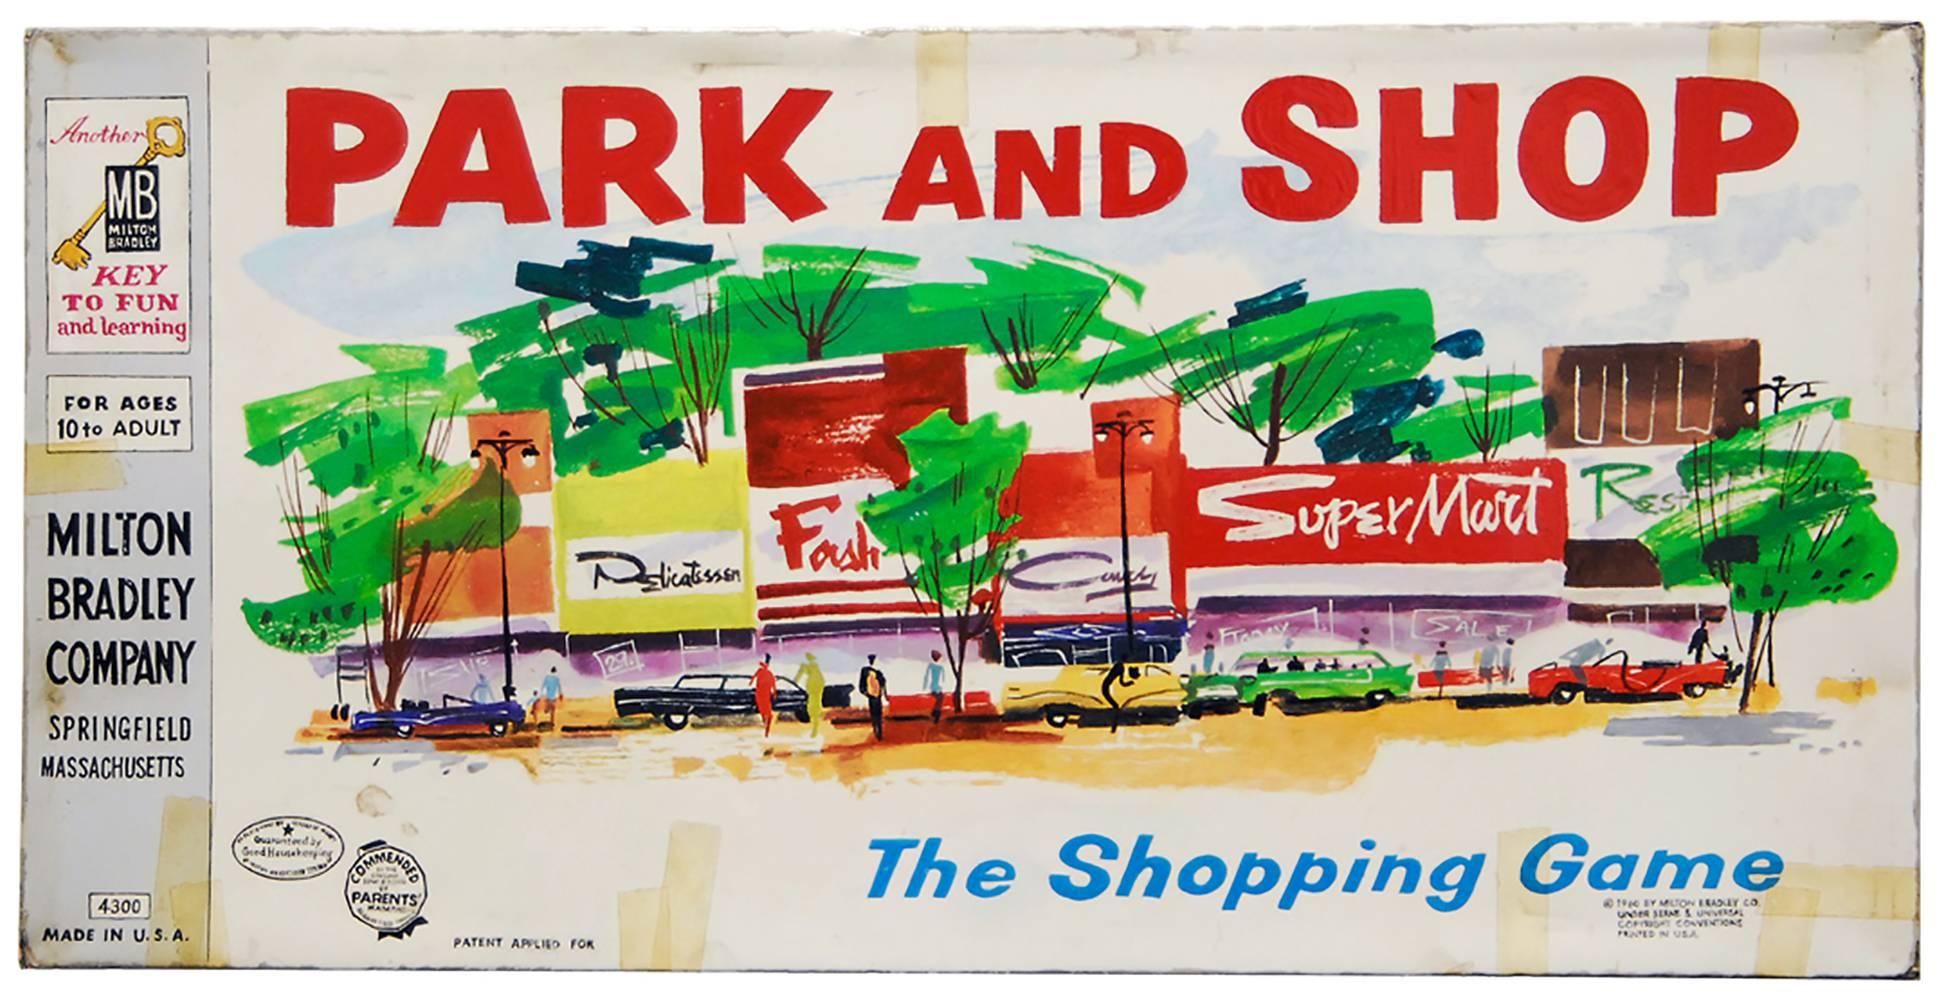 circa 1960 Park and Shop - Mixed Media Art by Tim Liddy